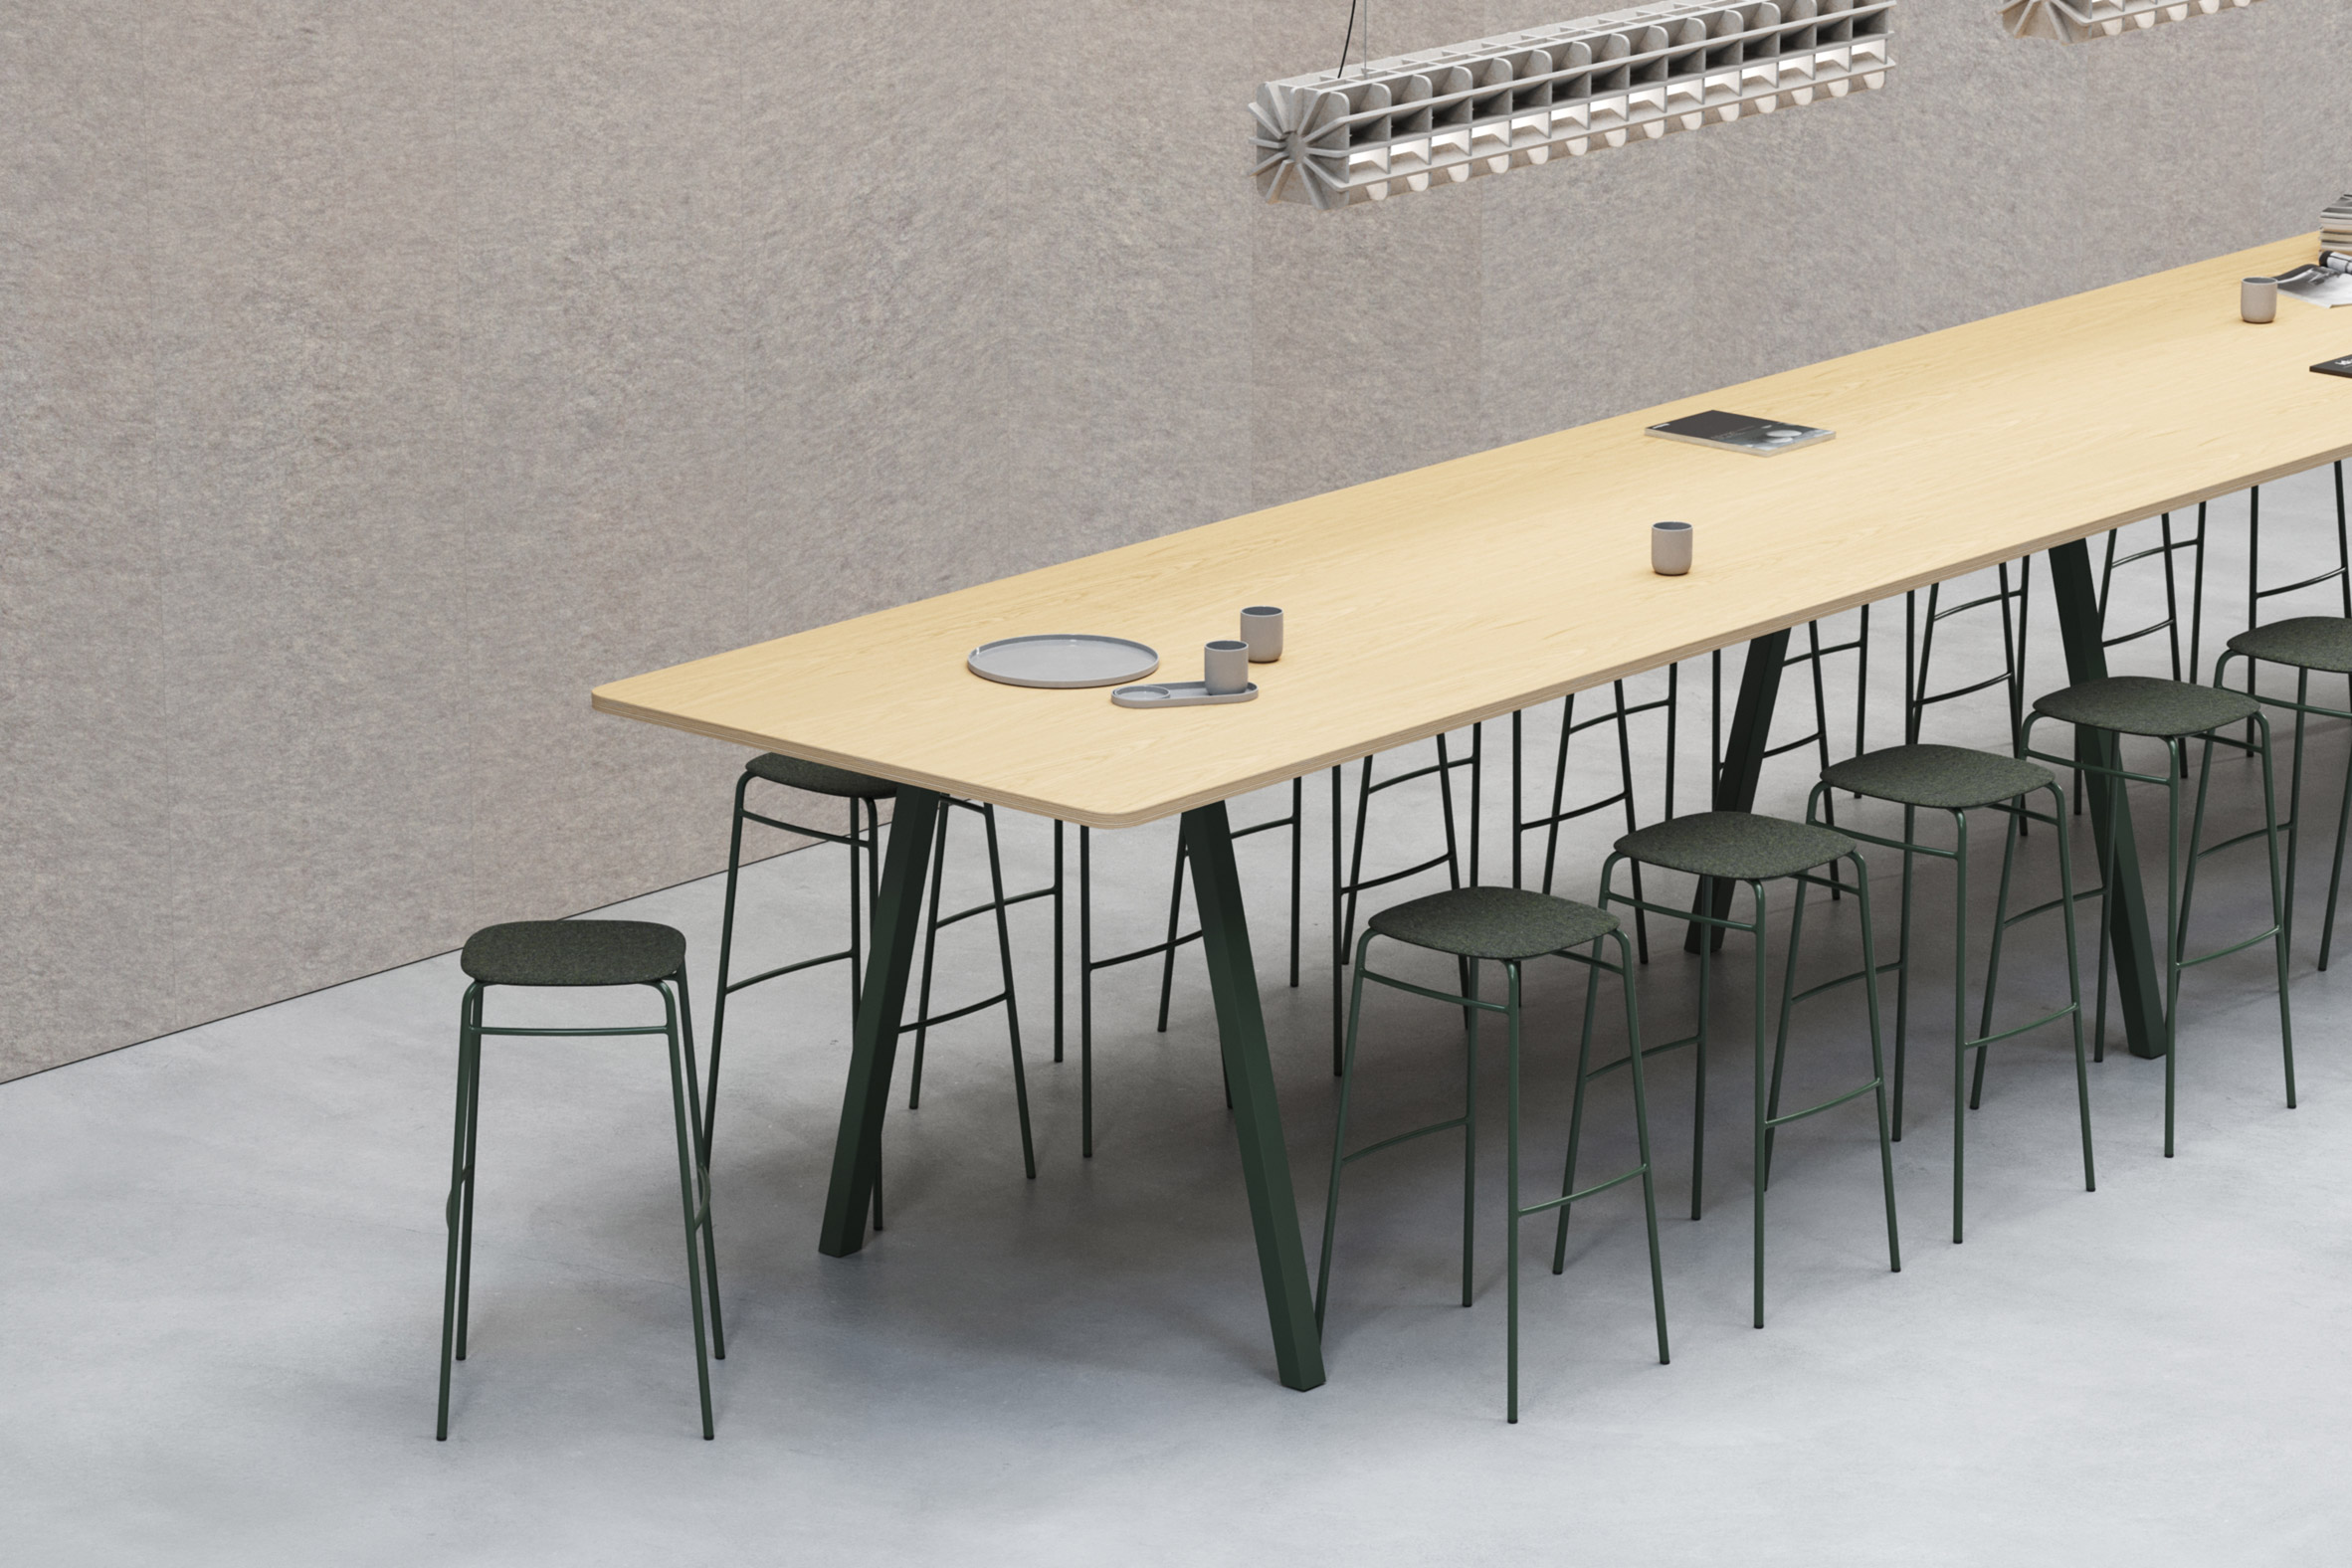 Green stools by De Vorm around a long office table